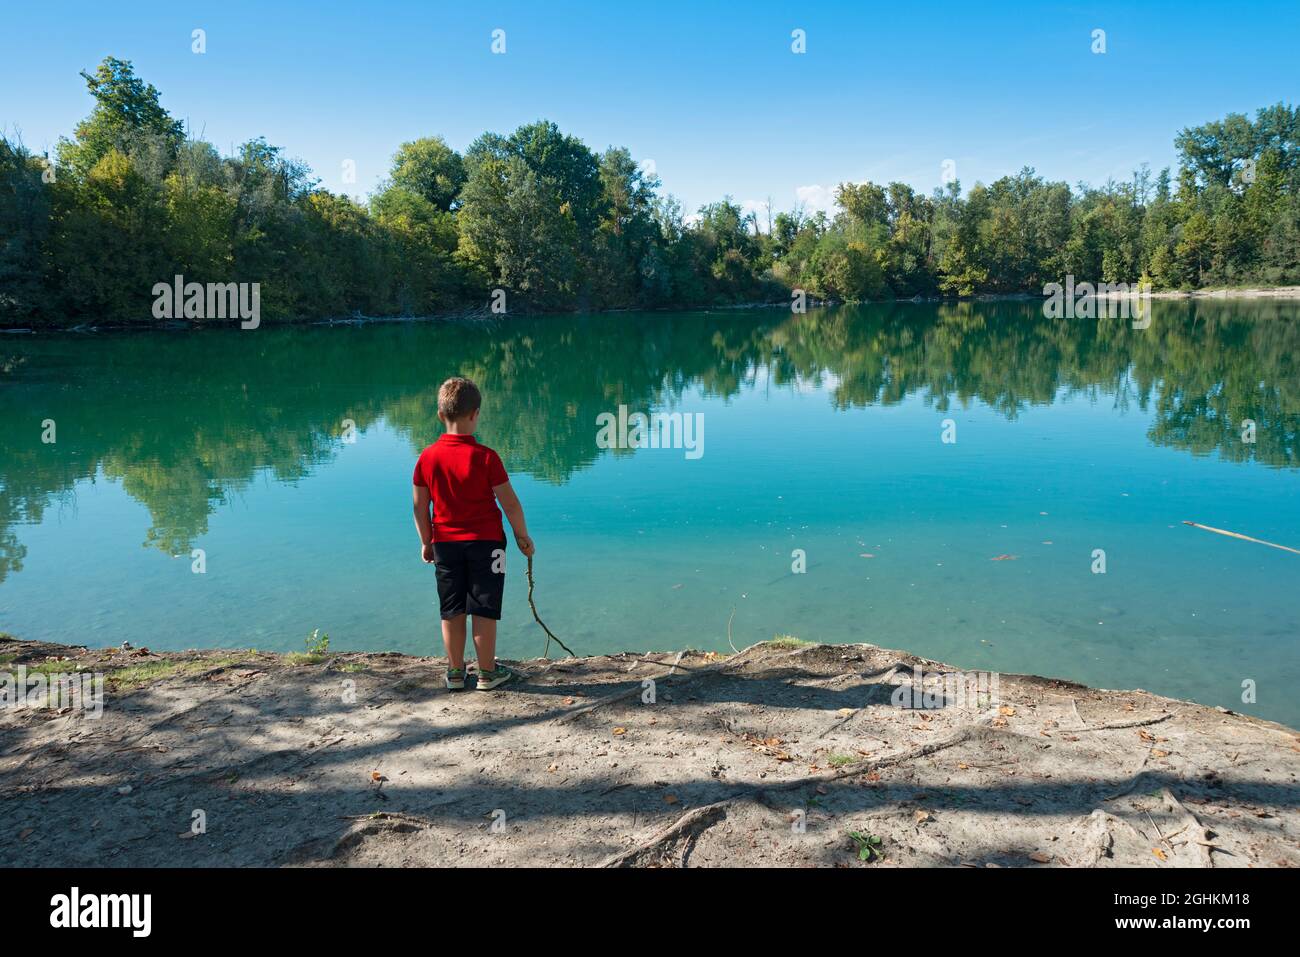 Italy, Lombardy, Ricengo, Lake of the Reflections, Chosen by the Director Luca Guadagnino for the Bathroom Scene of the Film Call Me by Your Name Stock Photo